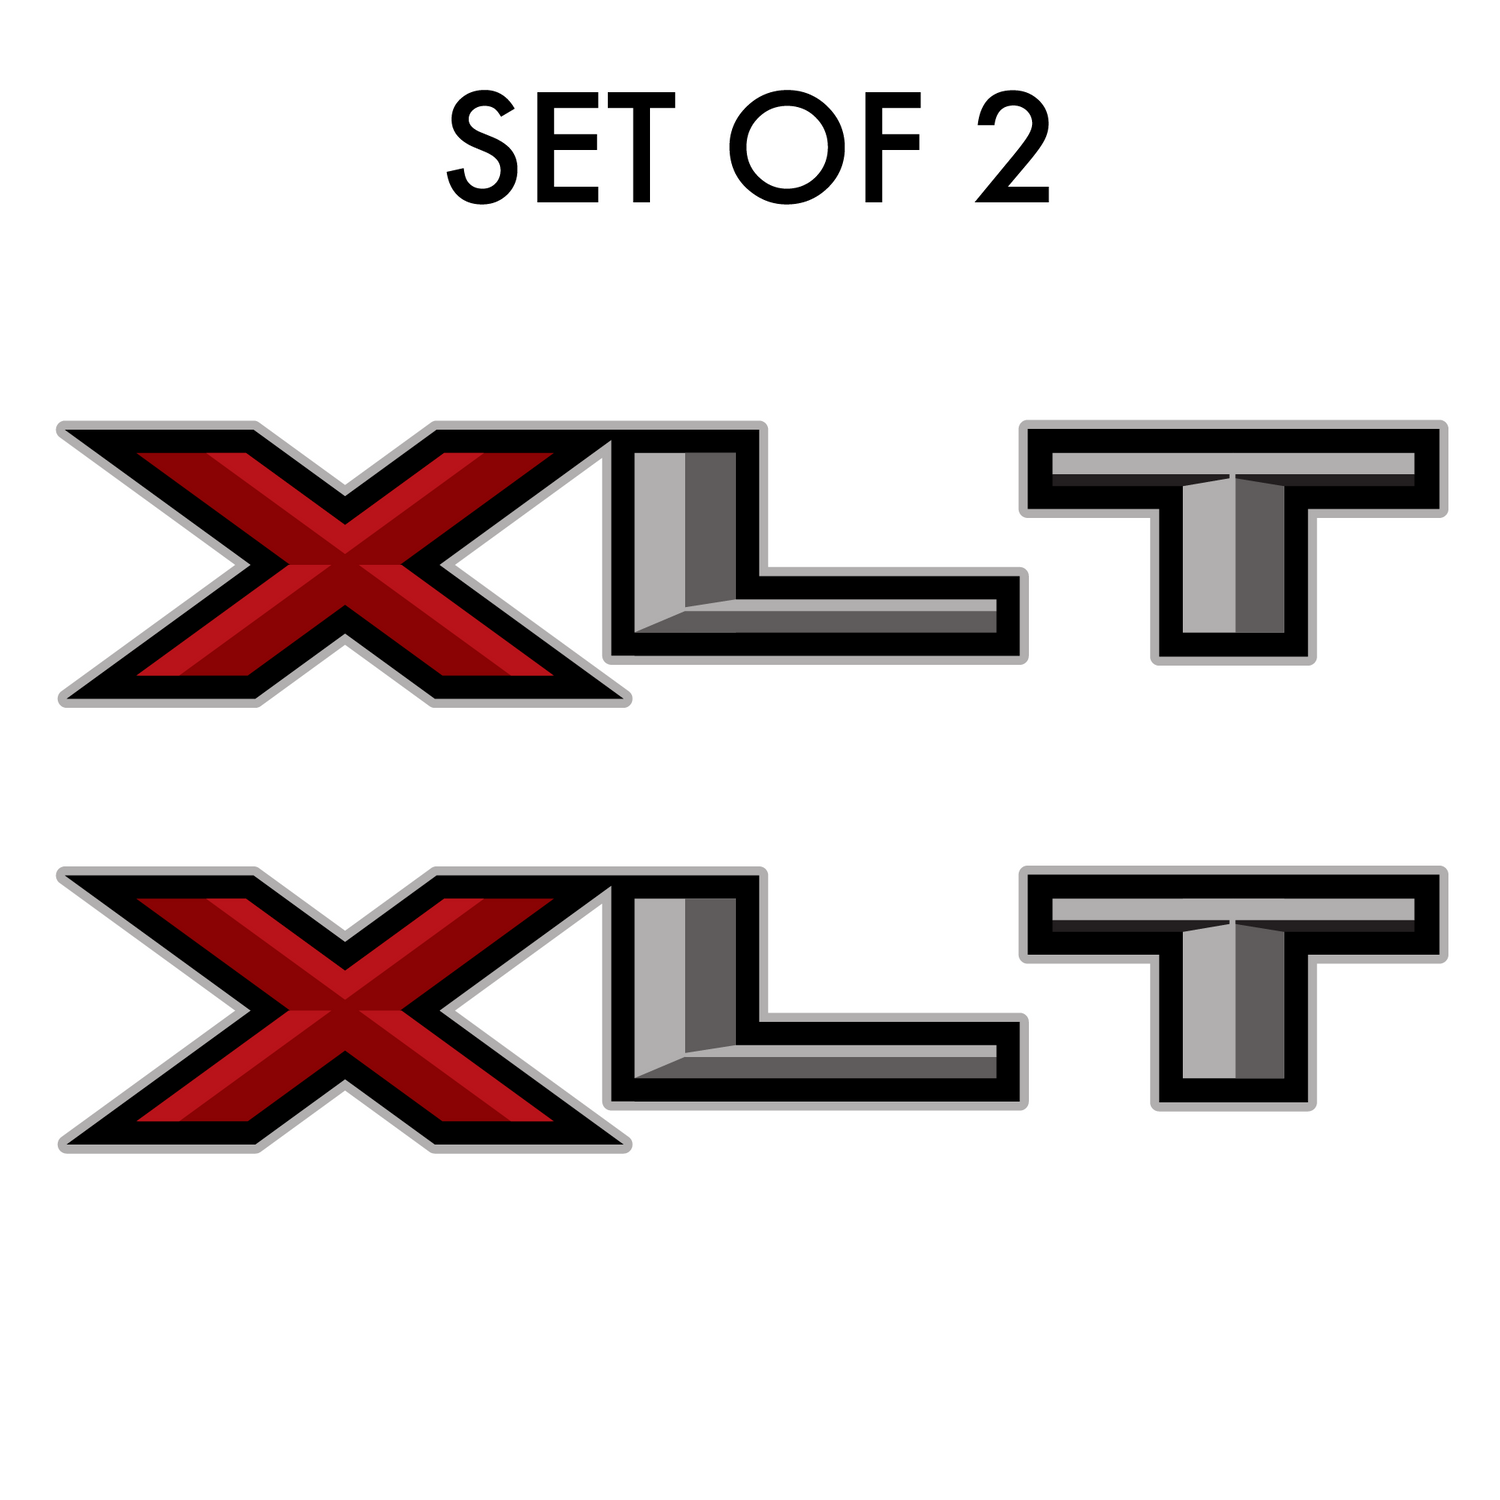 Set of 2: XLT vinyl decal for 2017-2019 Ford F-150 pickup truck bedside - US Rallystripes